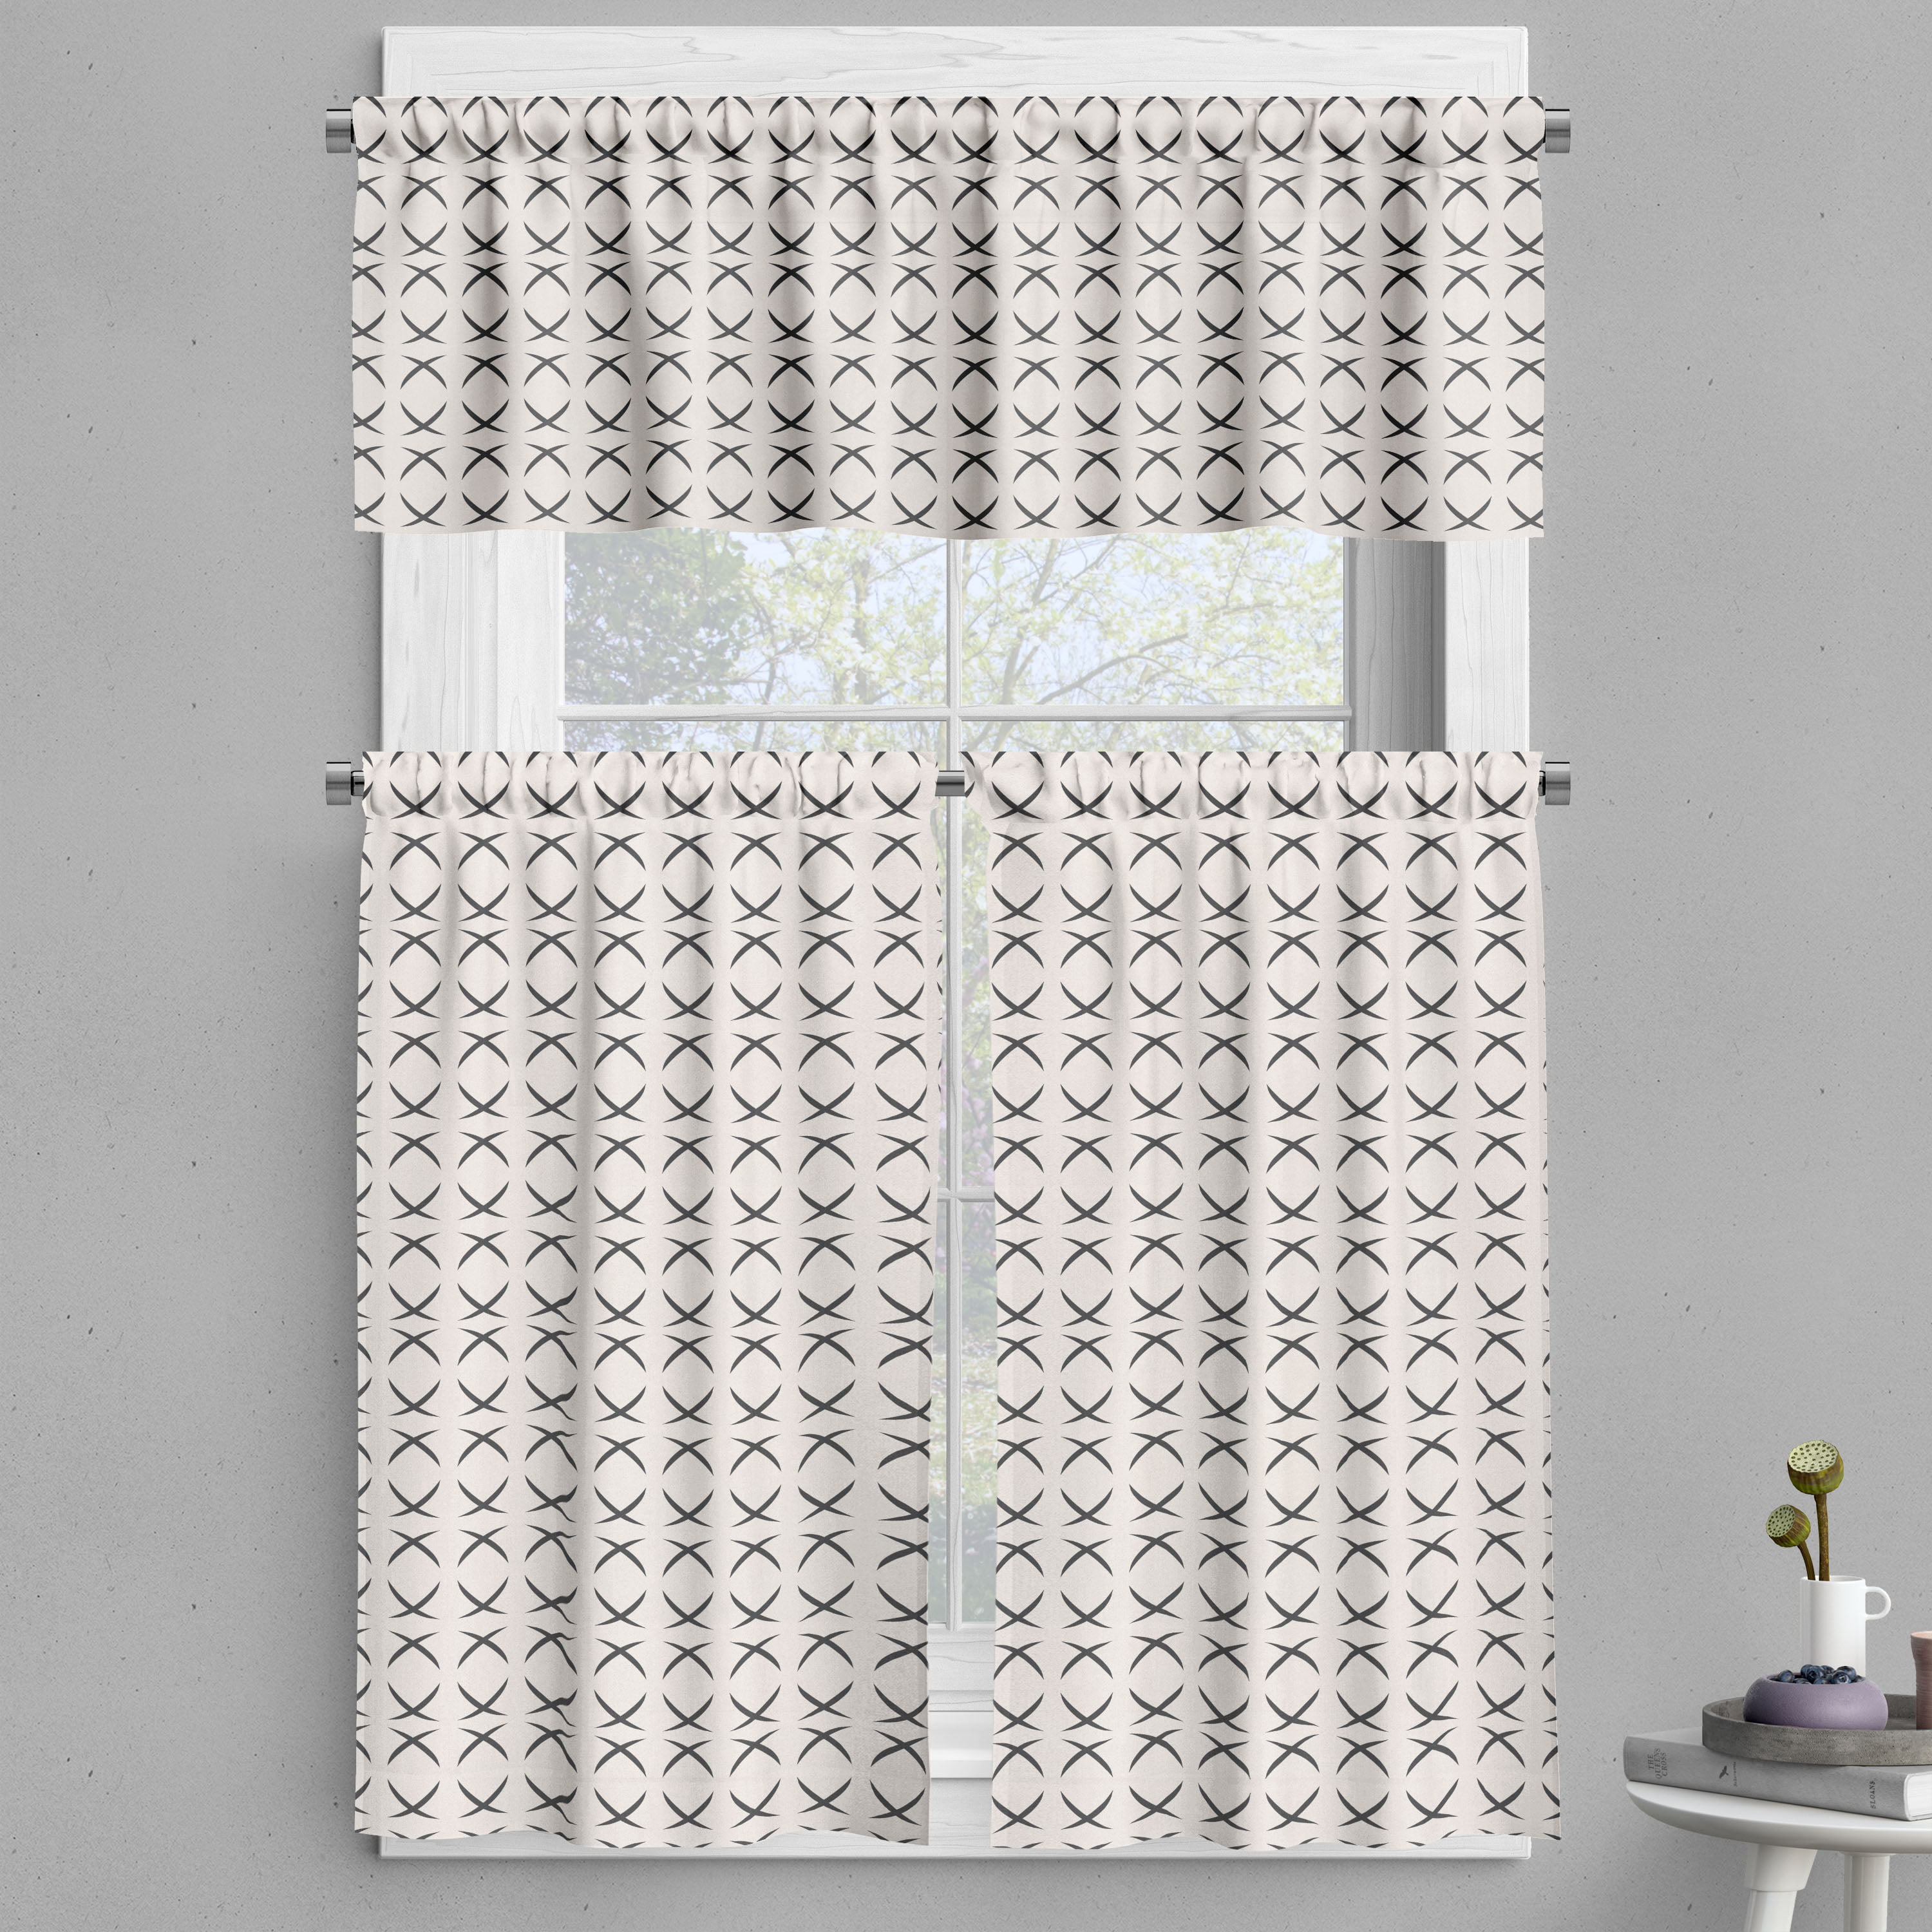 Geometric Valance & Tier Curtain 3 pcs Set, Modern Contemporary Image  Shapes Art Half Round Circles, Window Treatments Room Kitchen Decor, 4  Sizes, Charcoal Grey Pearl, by Ambesonne - Walmart.com